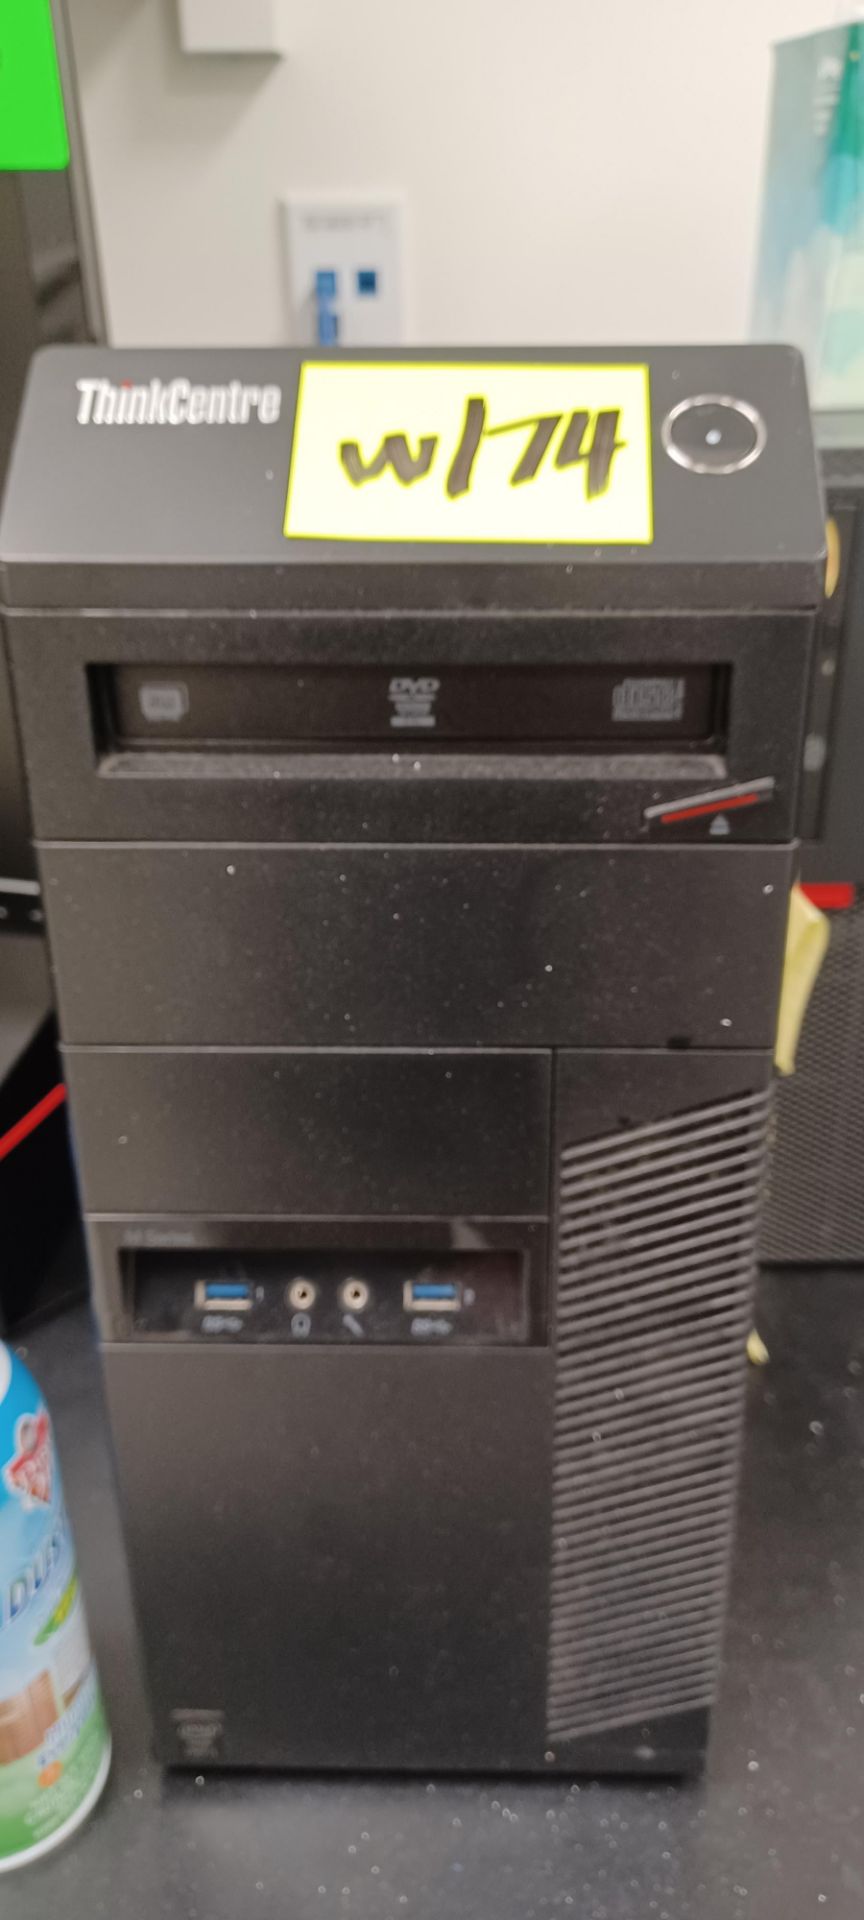 LENOVO THINKCENTRE I5 DESKTOP WITH DUAL MONITORS (SUBJECT TO CONFIRMATION) - Image 4 of 4